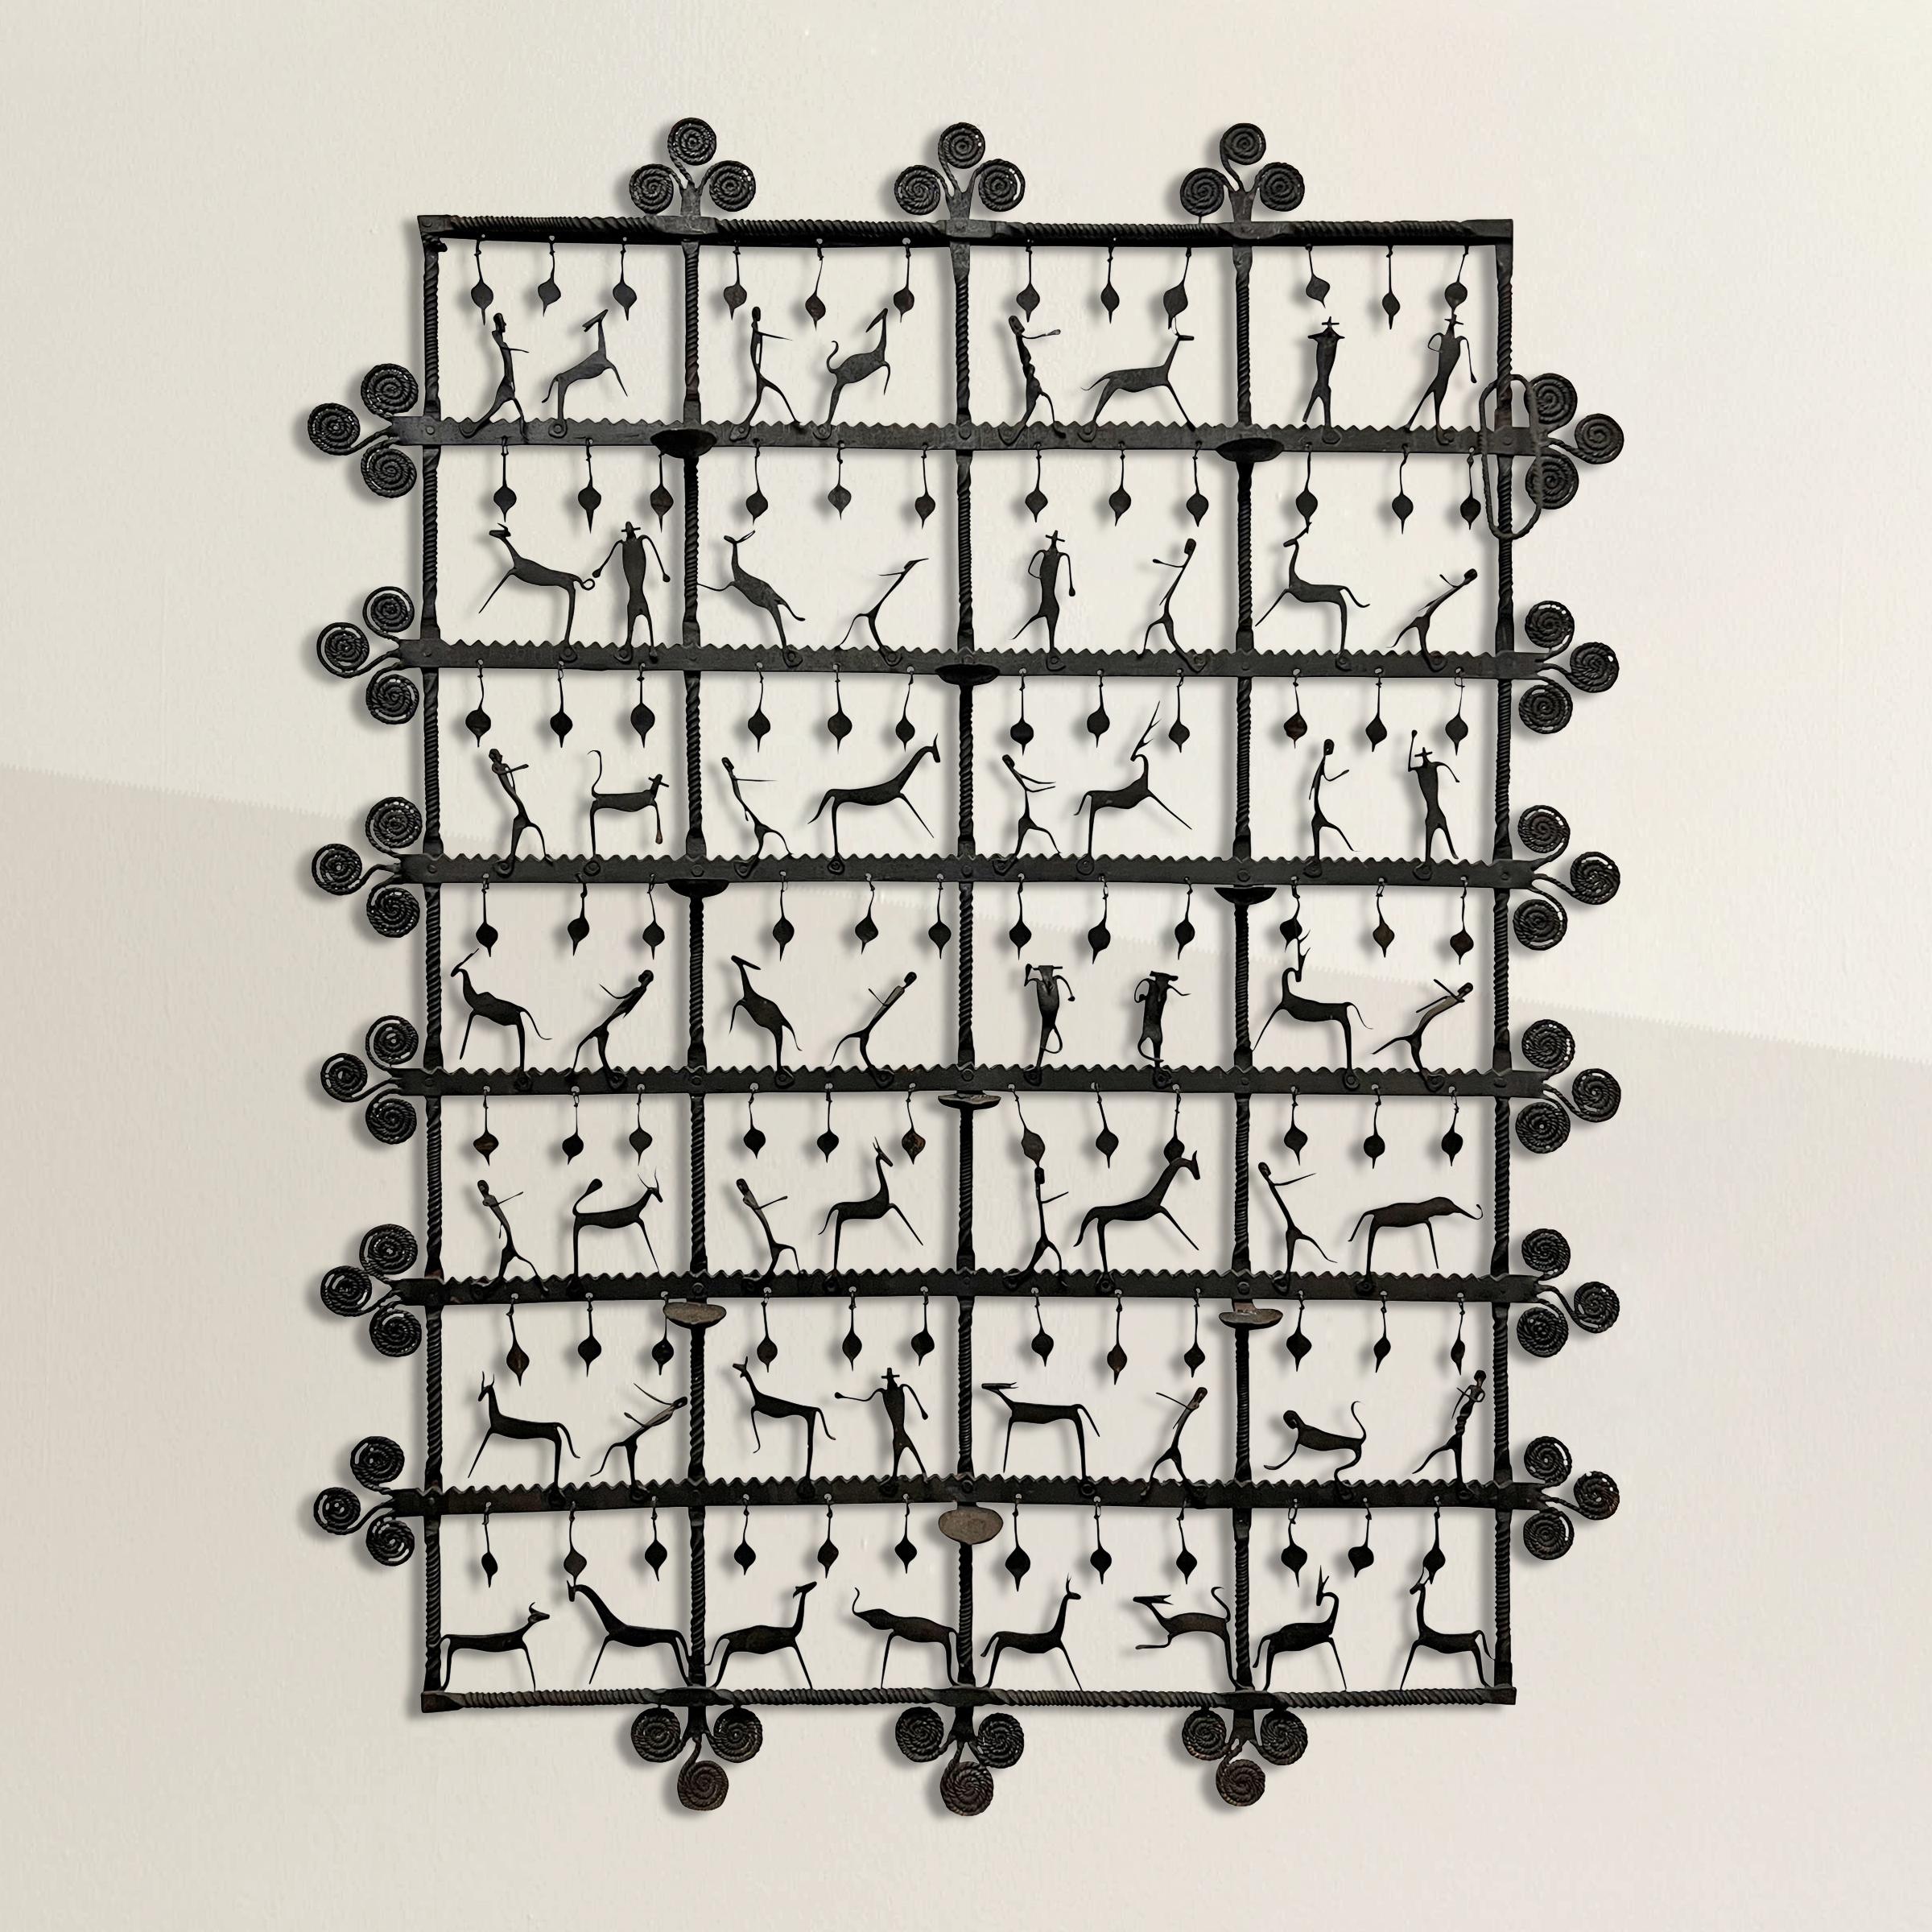 Step into the enchanting world of French 1950s modernism with an exquisite hand-wrought iron wall sculpture from the esteemed Atelier de Marolles. This masterpiece, intricately constructed in a grid pattern of 28 squares, unfolds a visual narrative